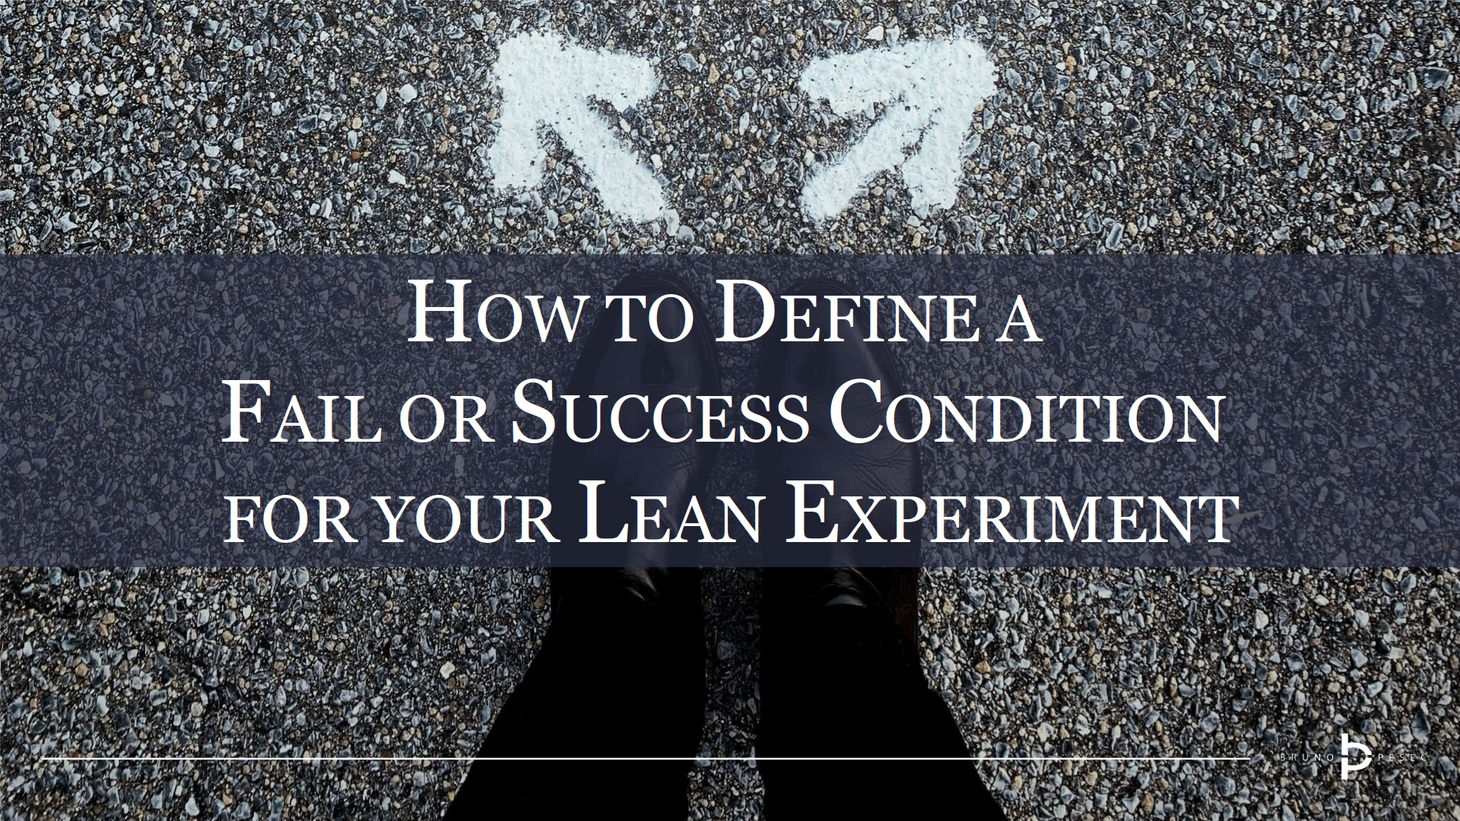 How to define a fail or success condition for your Lean experiment